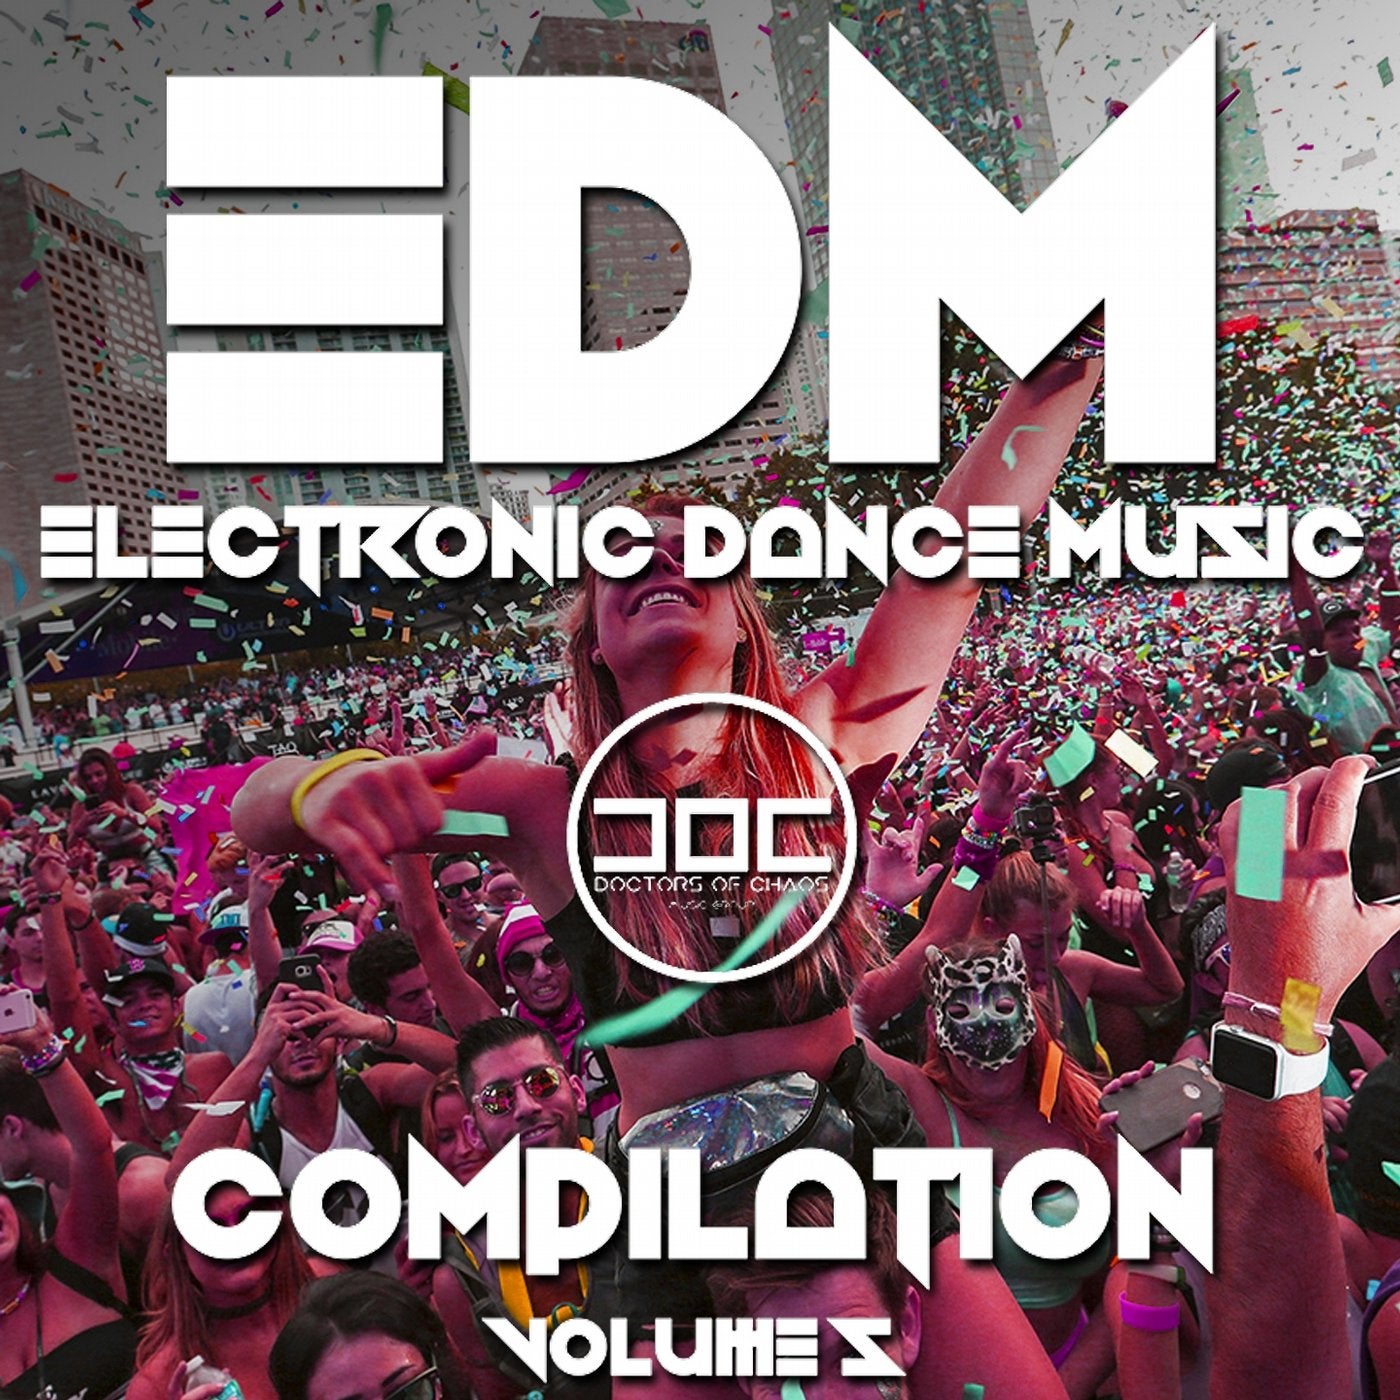 Electronic Dance Music Compilation, Vol. 5